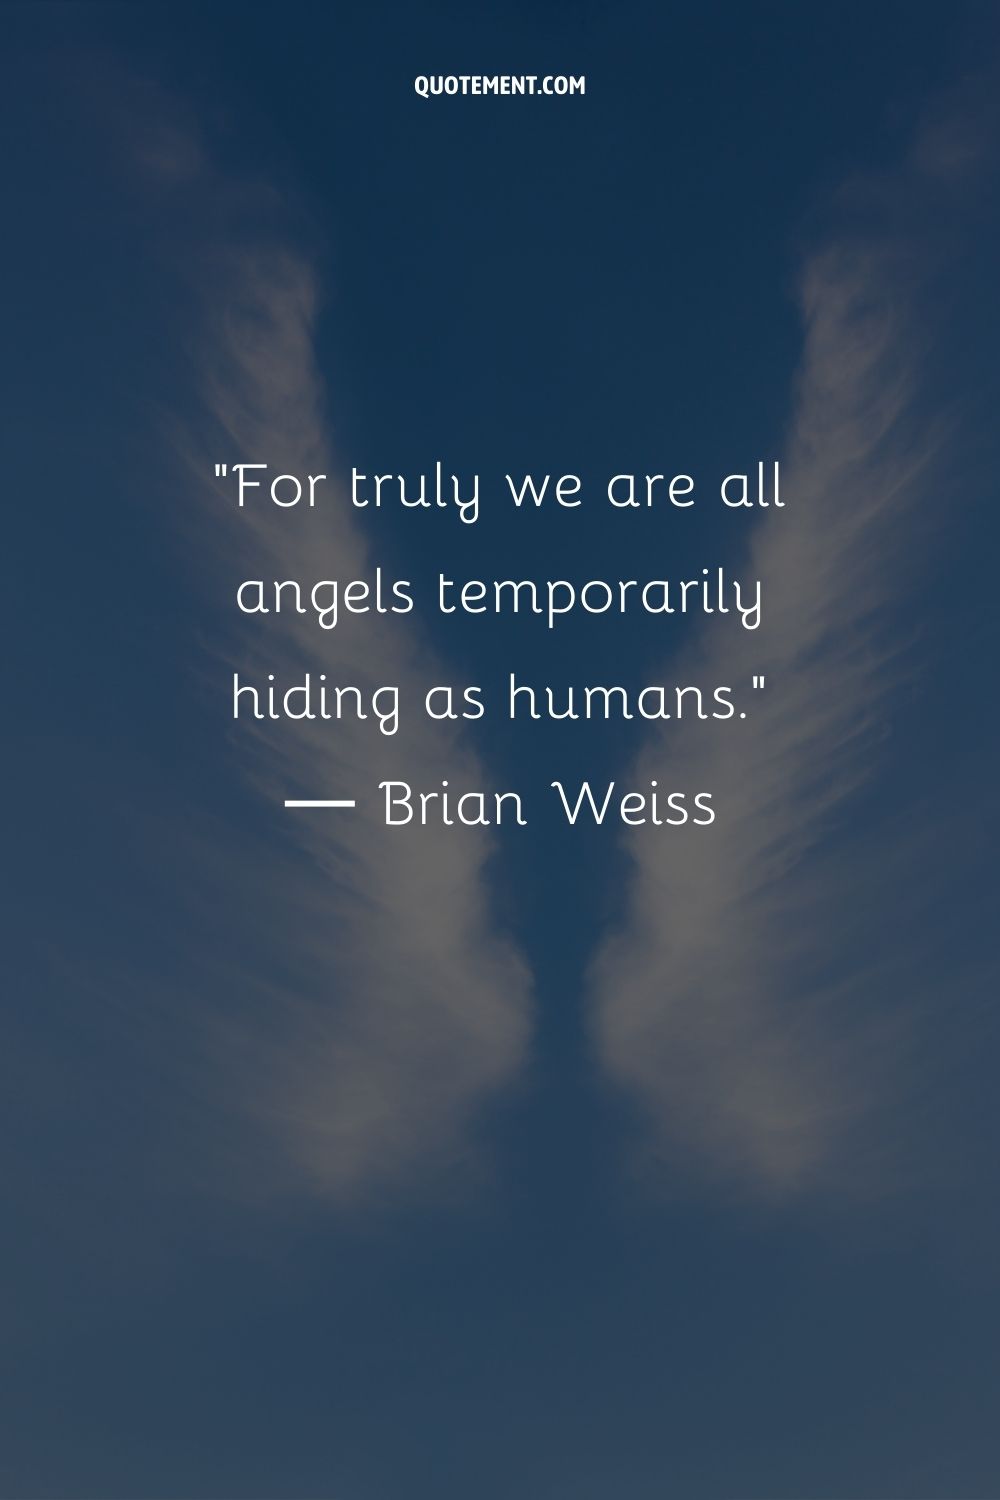 For truly we are all angels temporarily hiding as humans